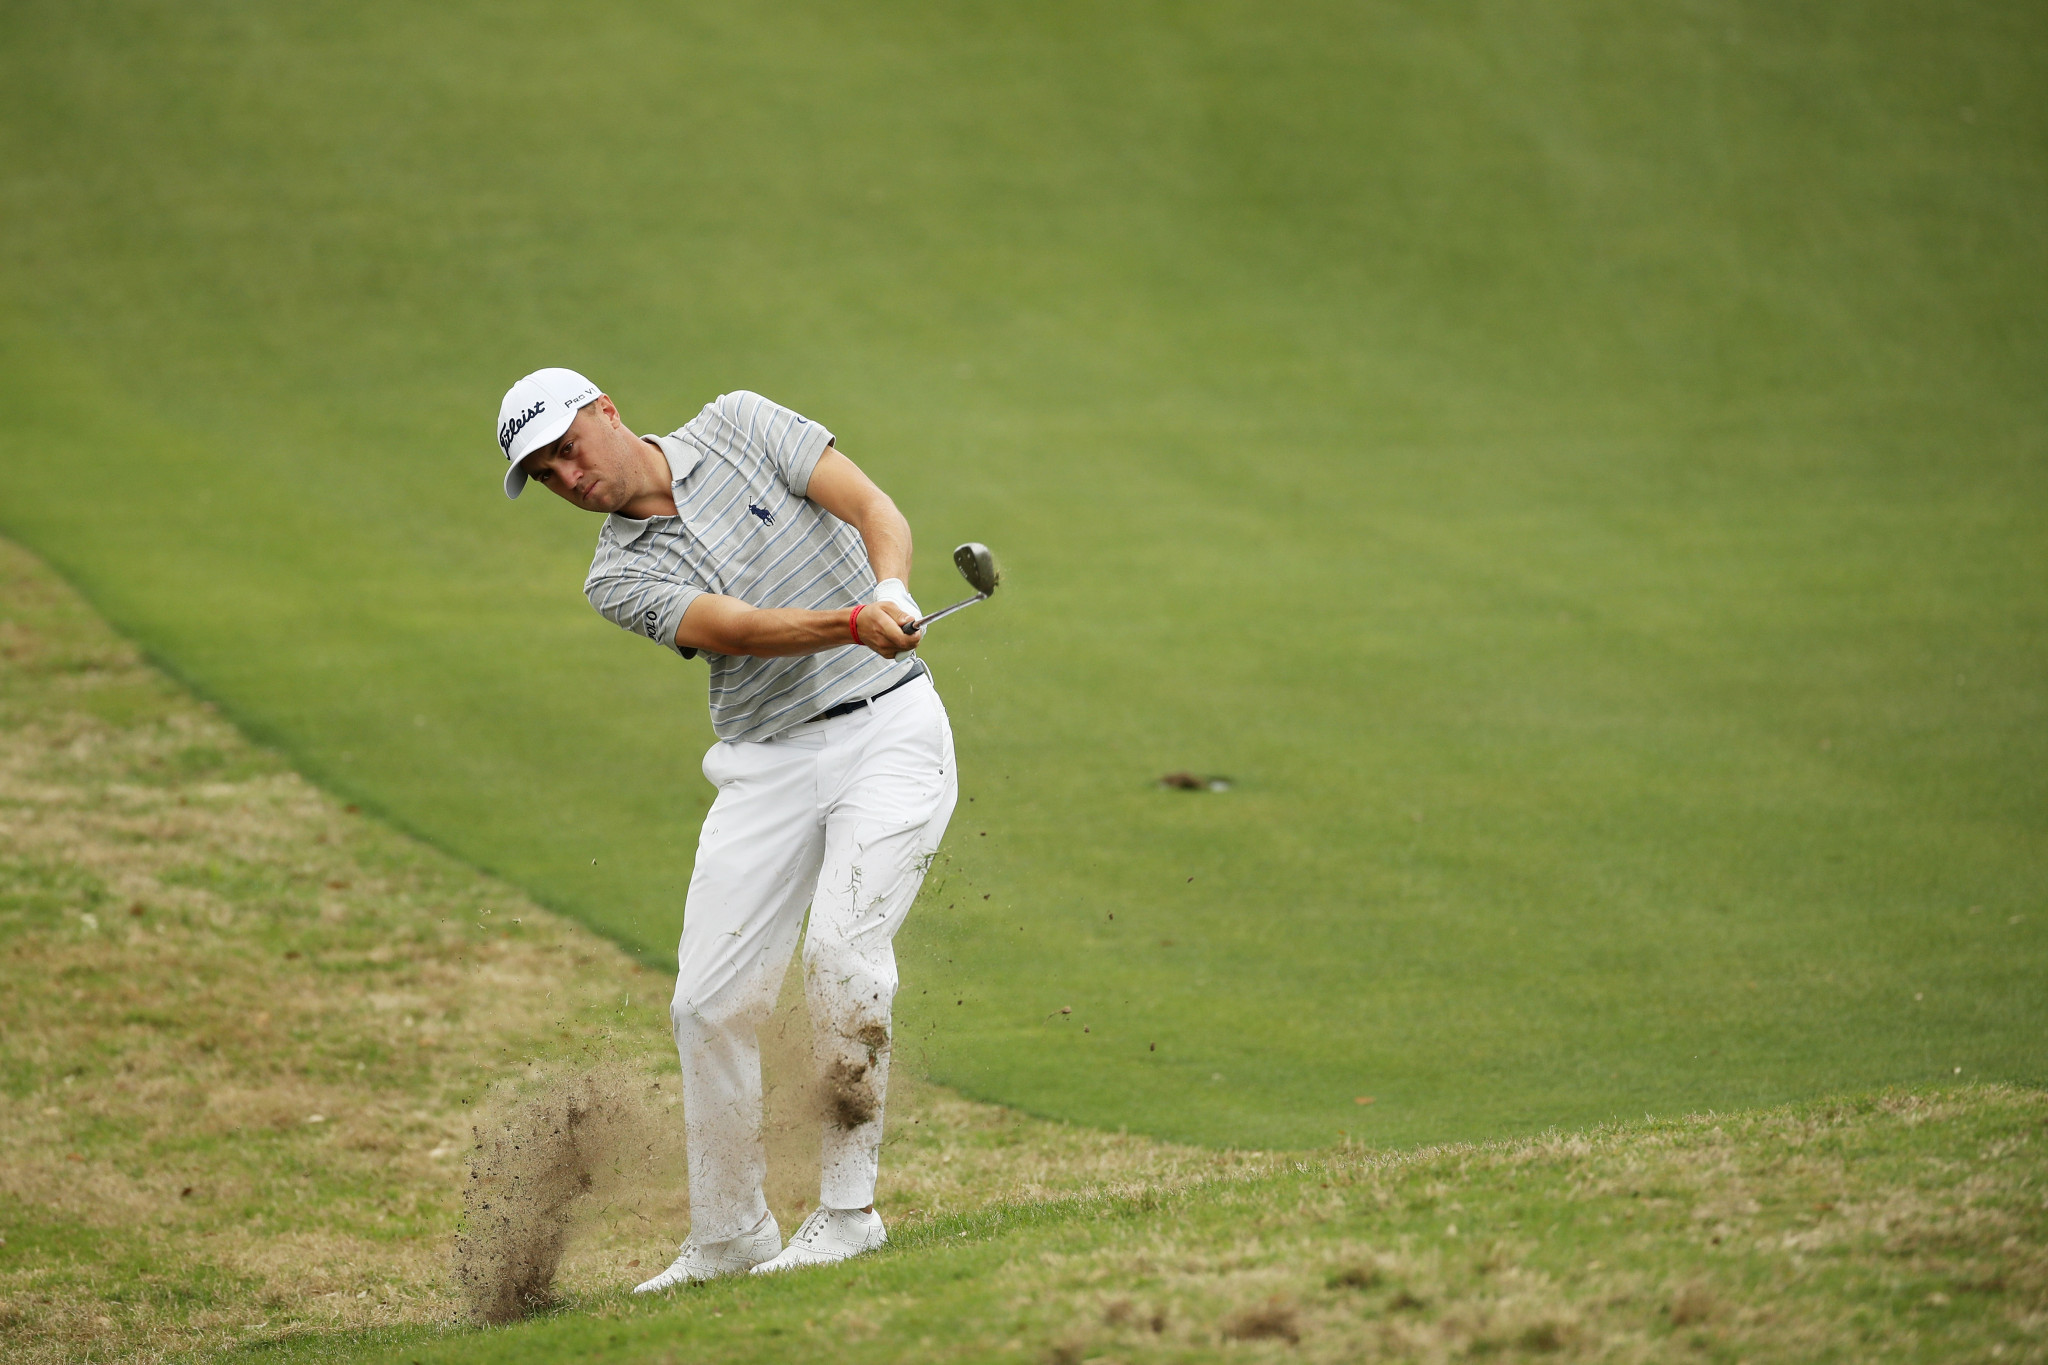 Thomas progresses with ease as McIlroy crashes out at WGC Match Play